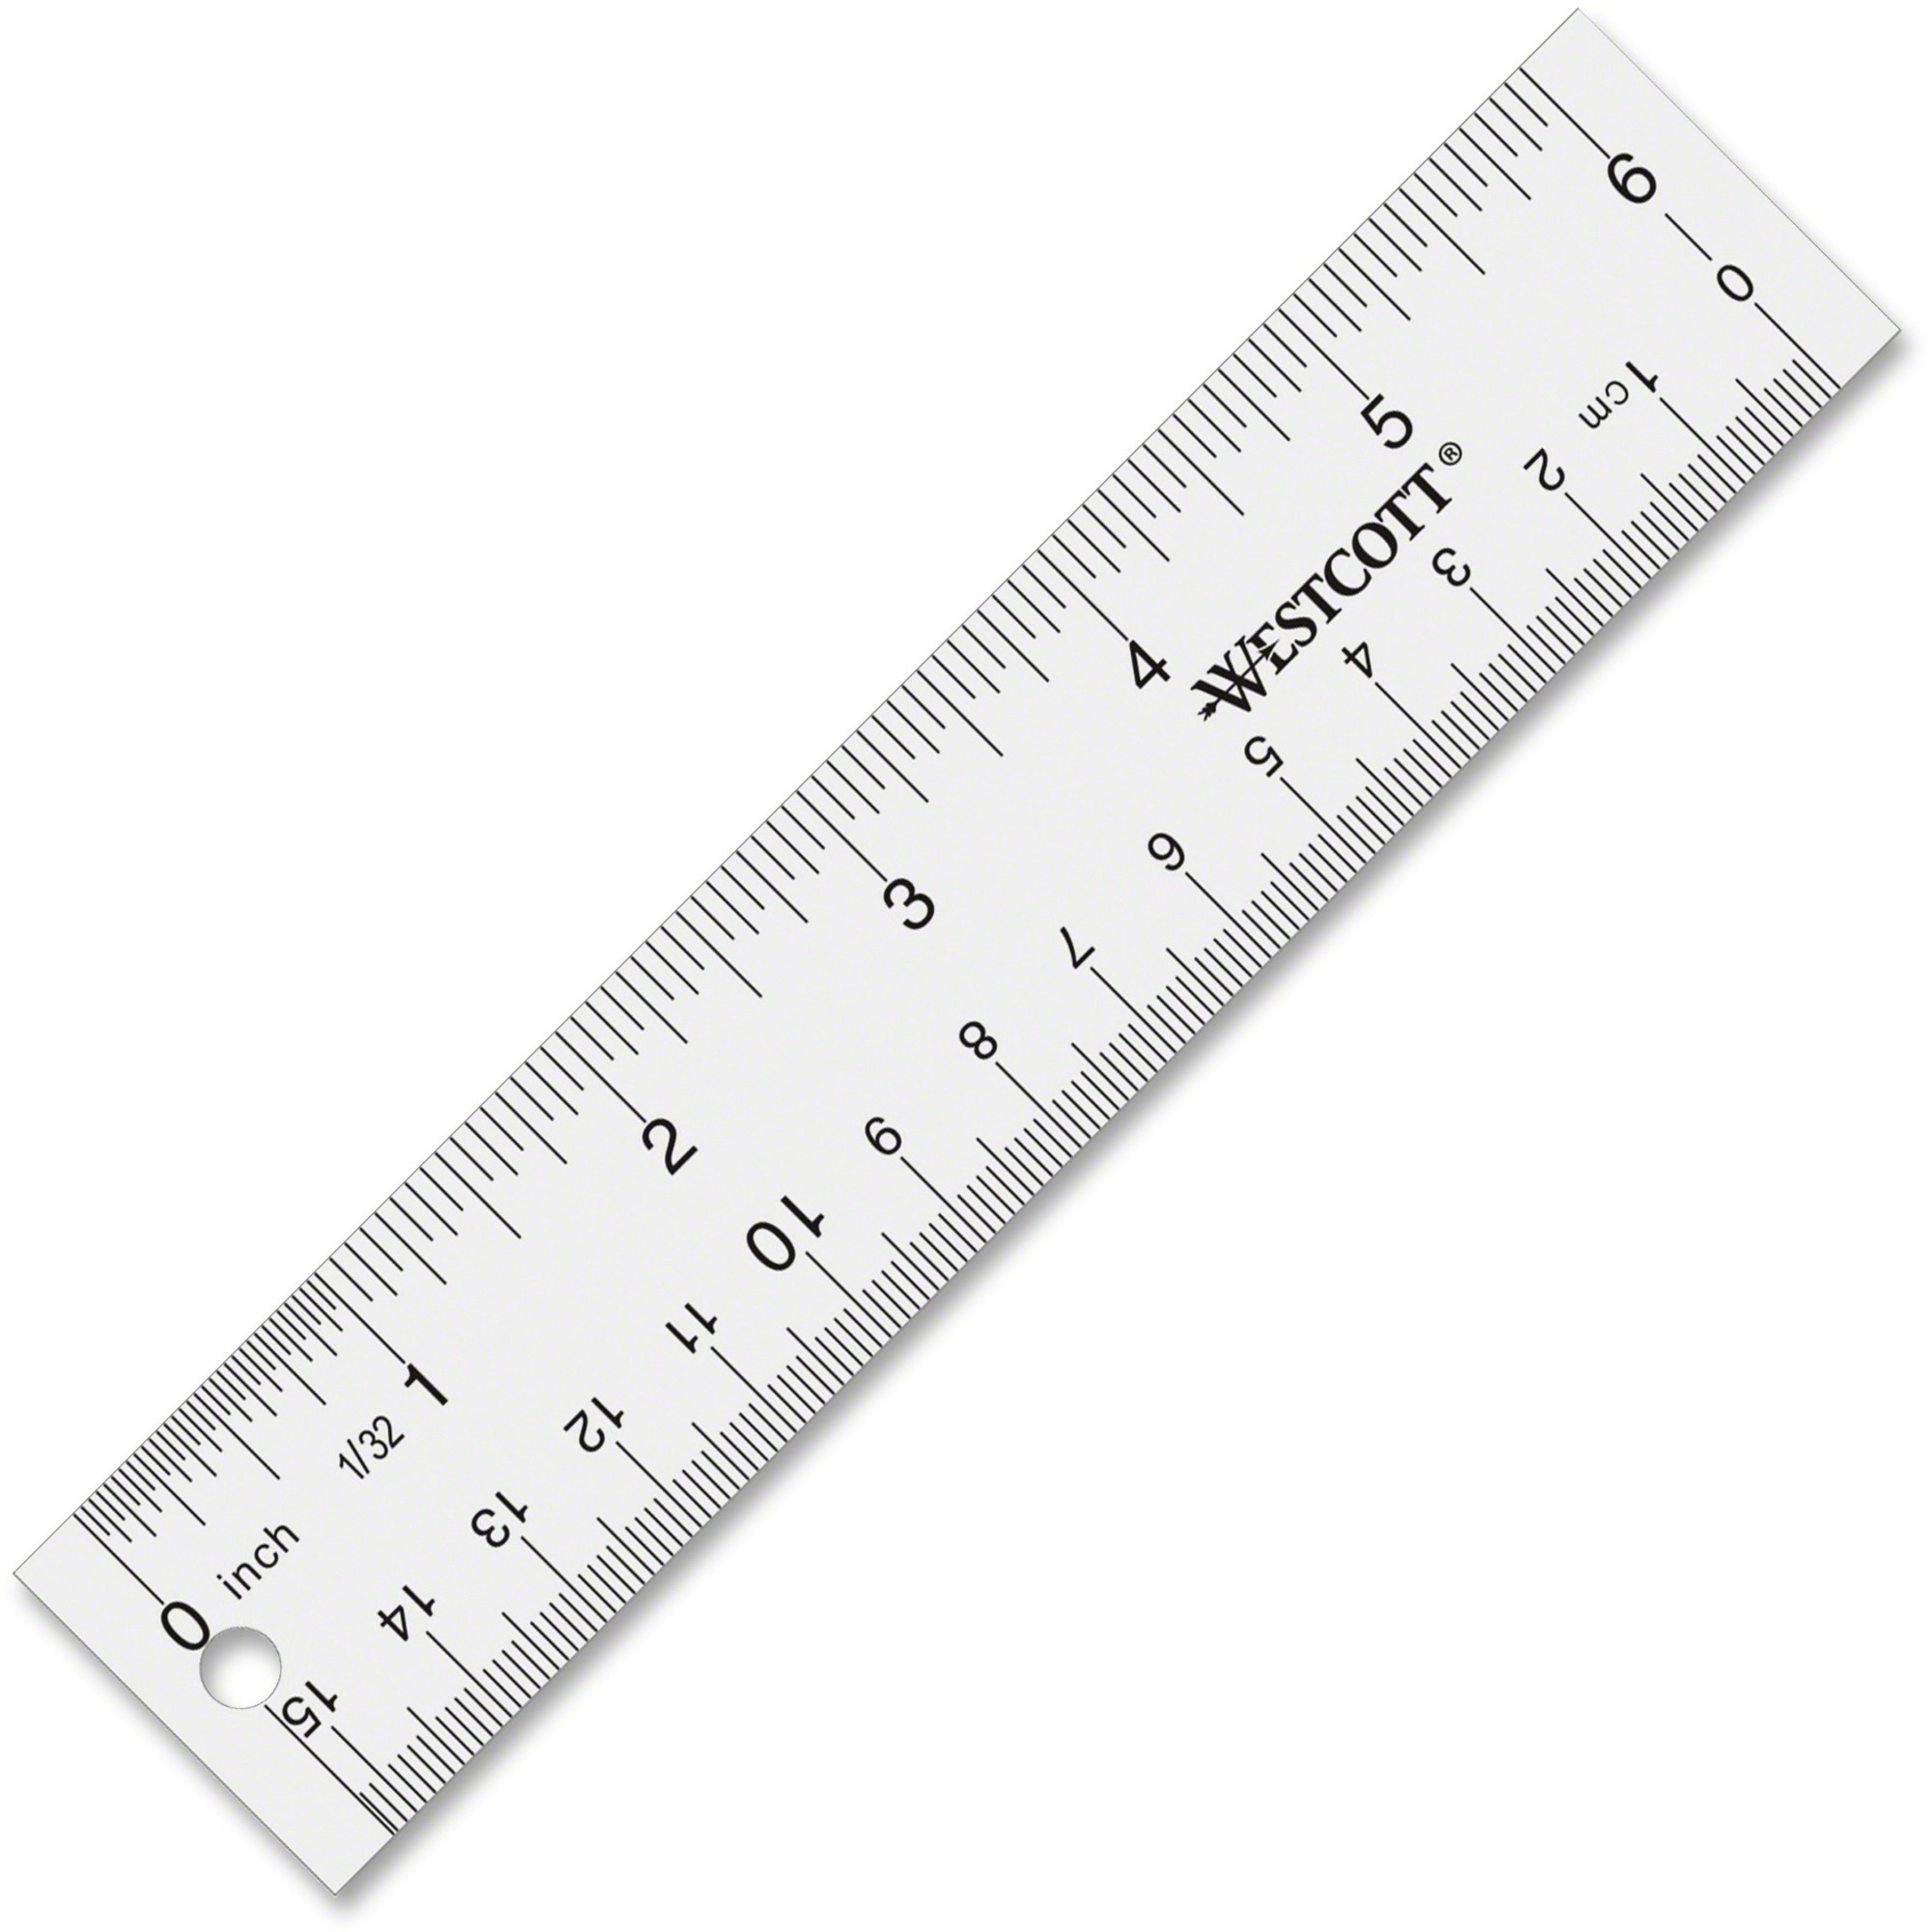 6.9 inches on a ruler life size